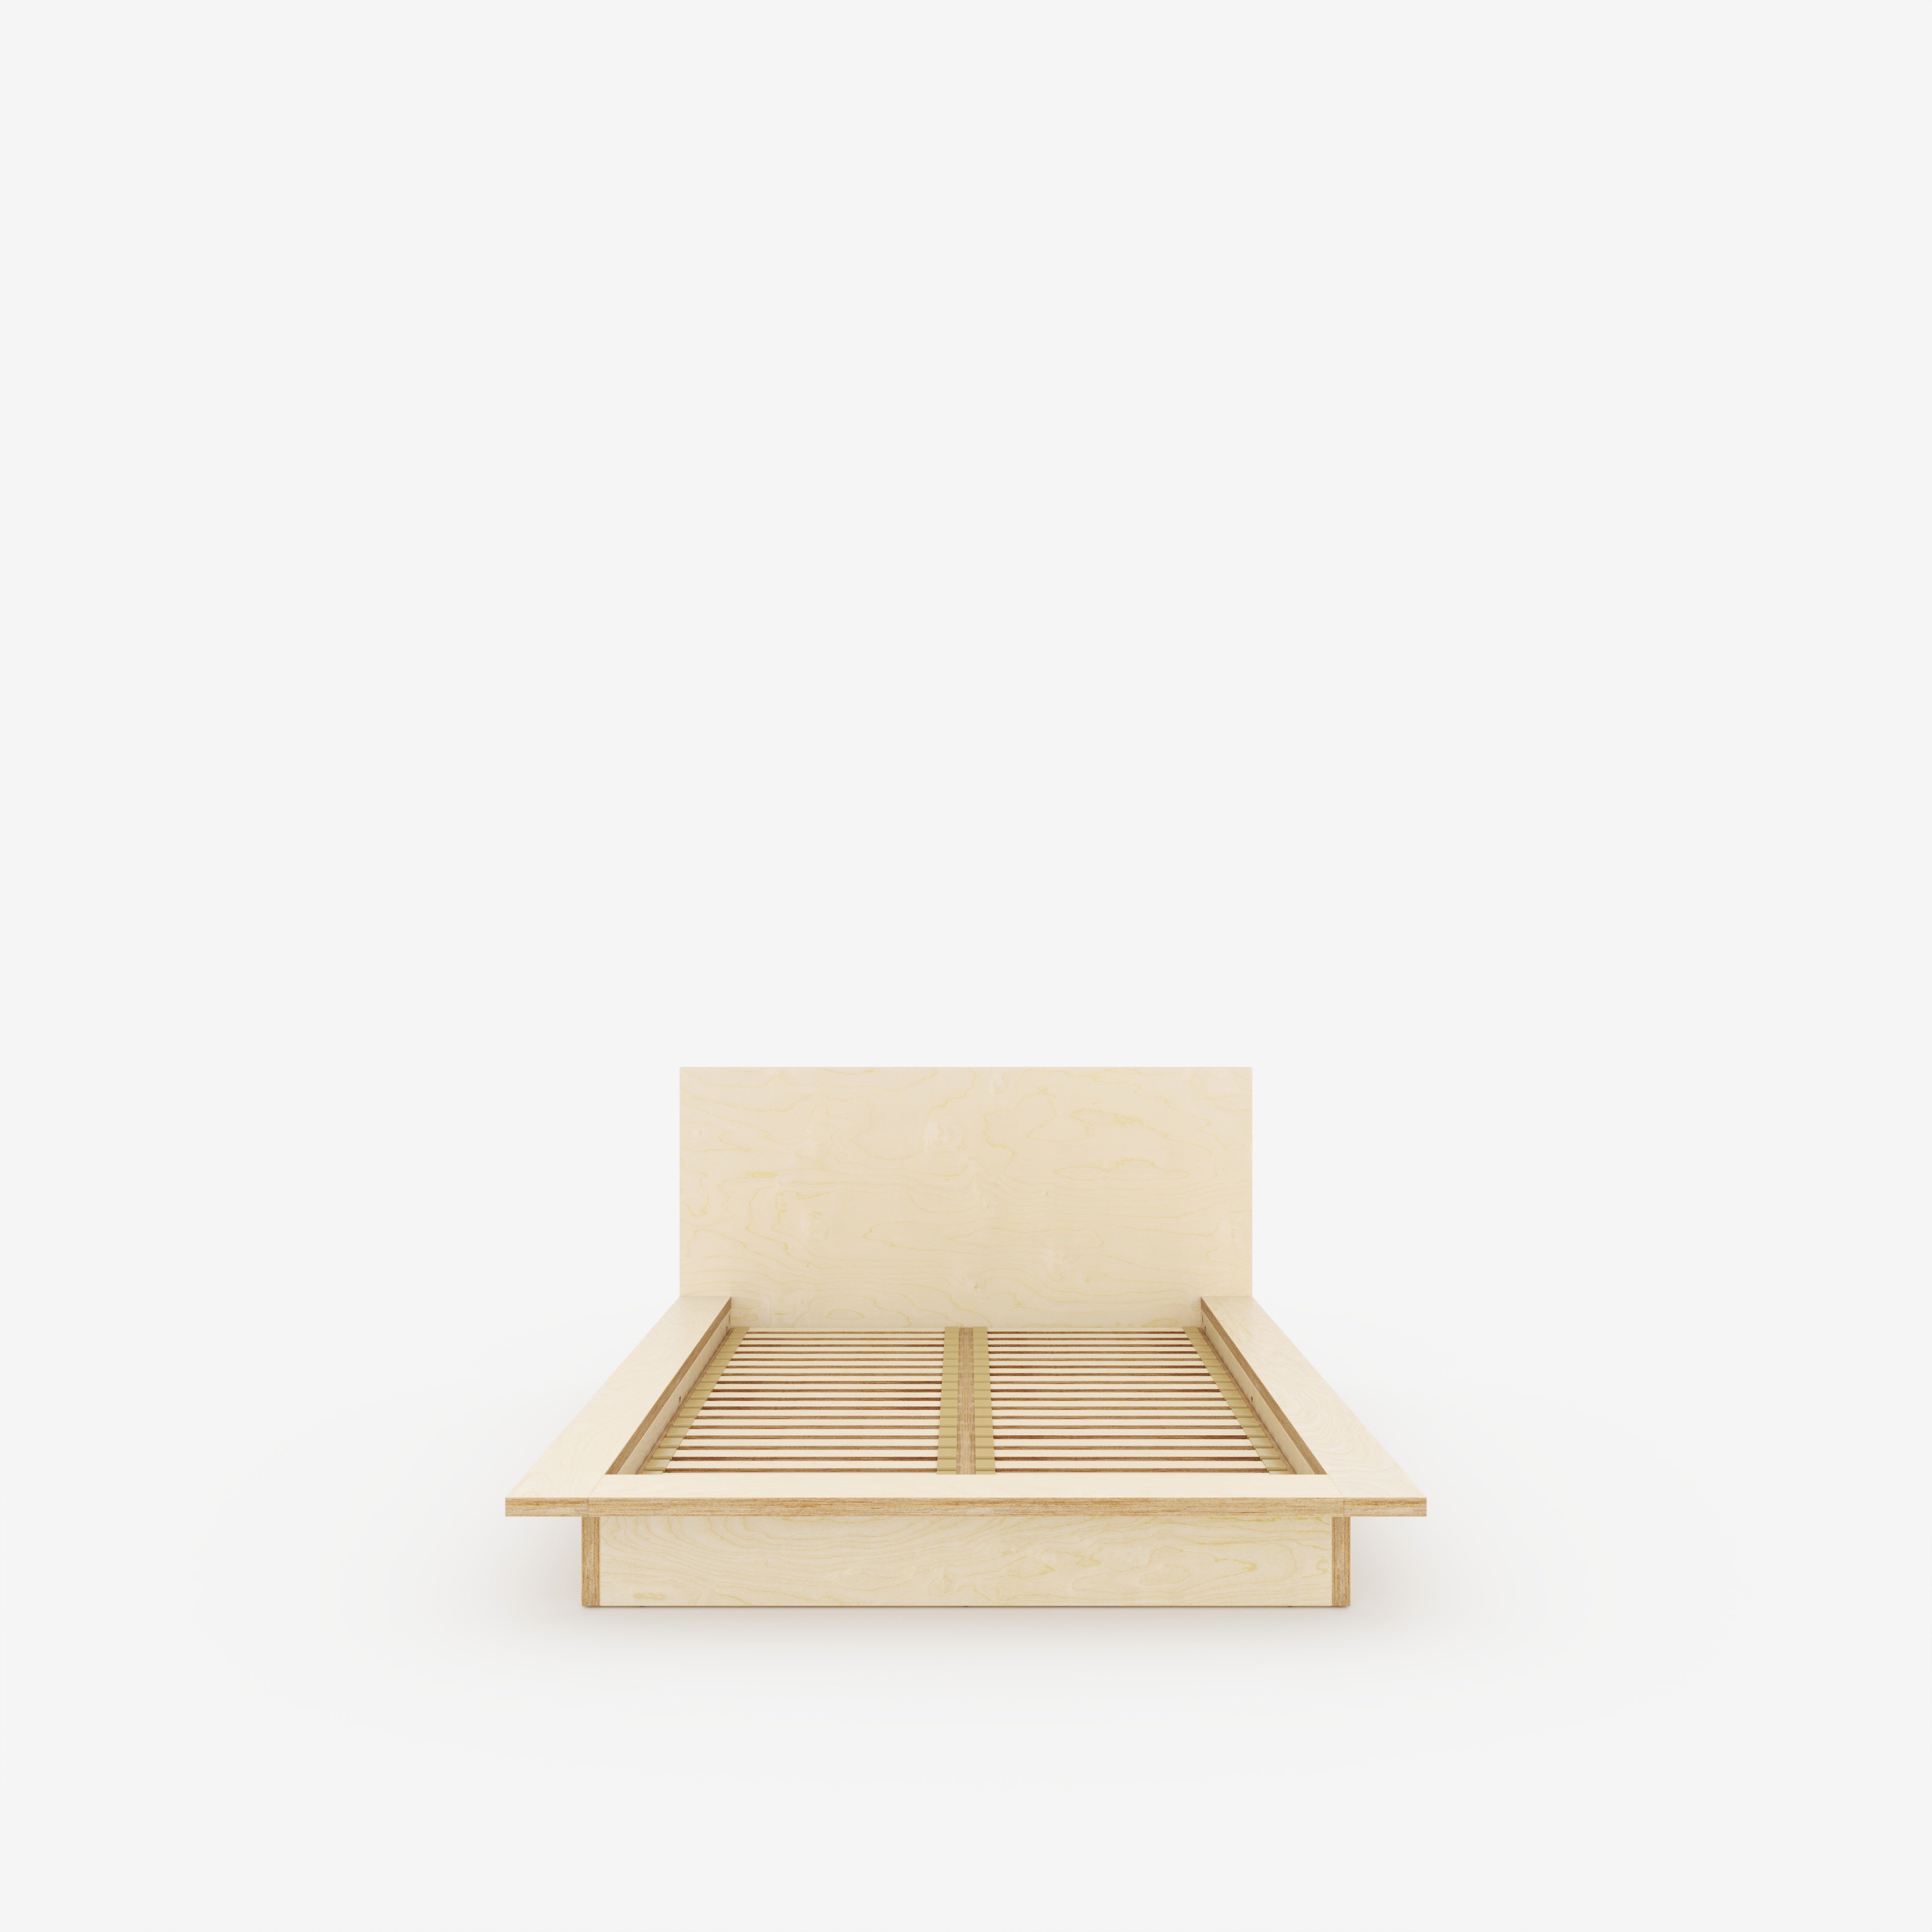 Plywood Platform Bed - Plywood Birch - Standard Double 1350(w) x 1900(d) Low